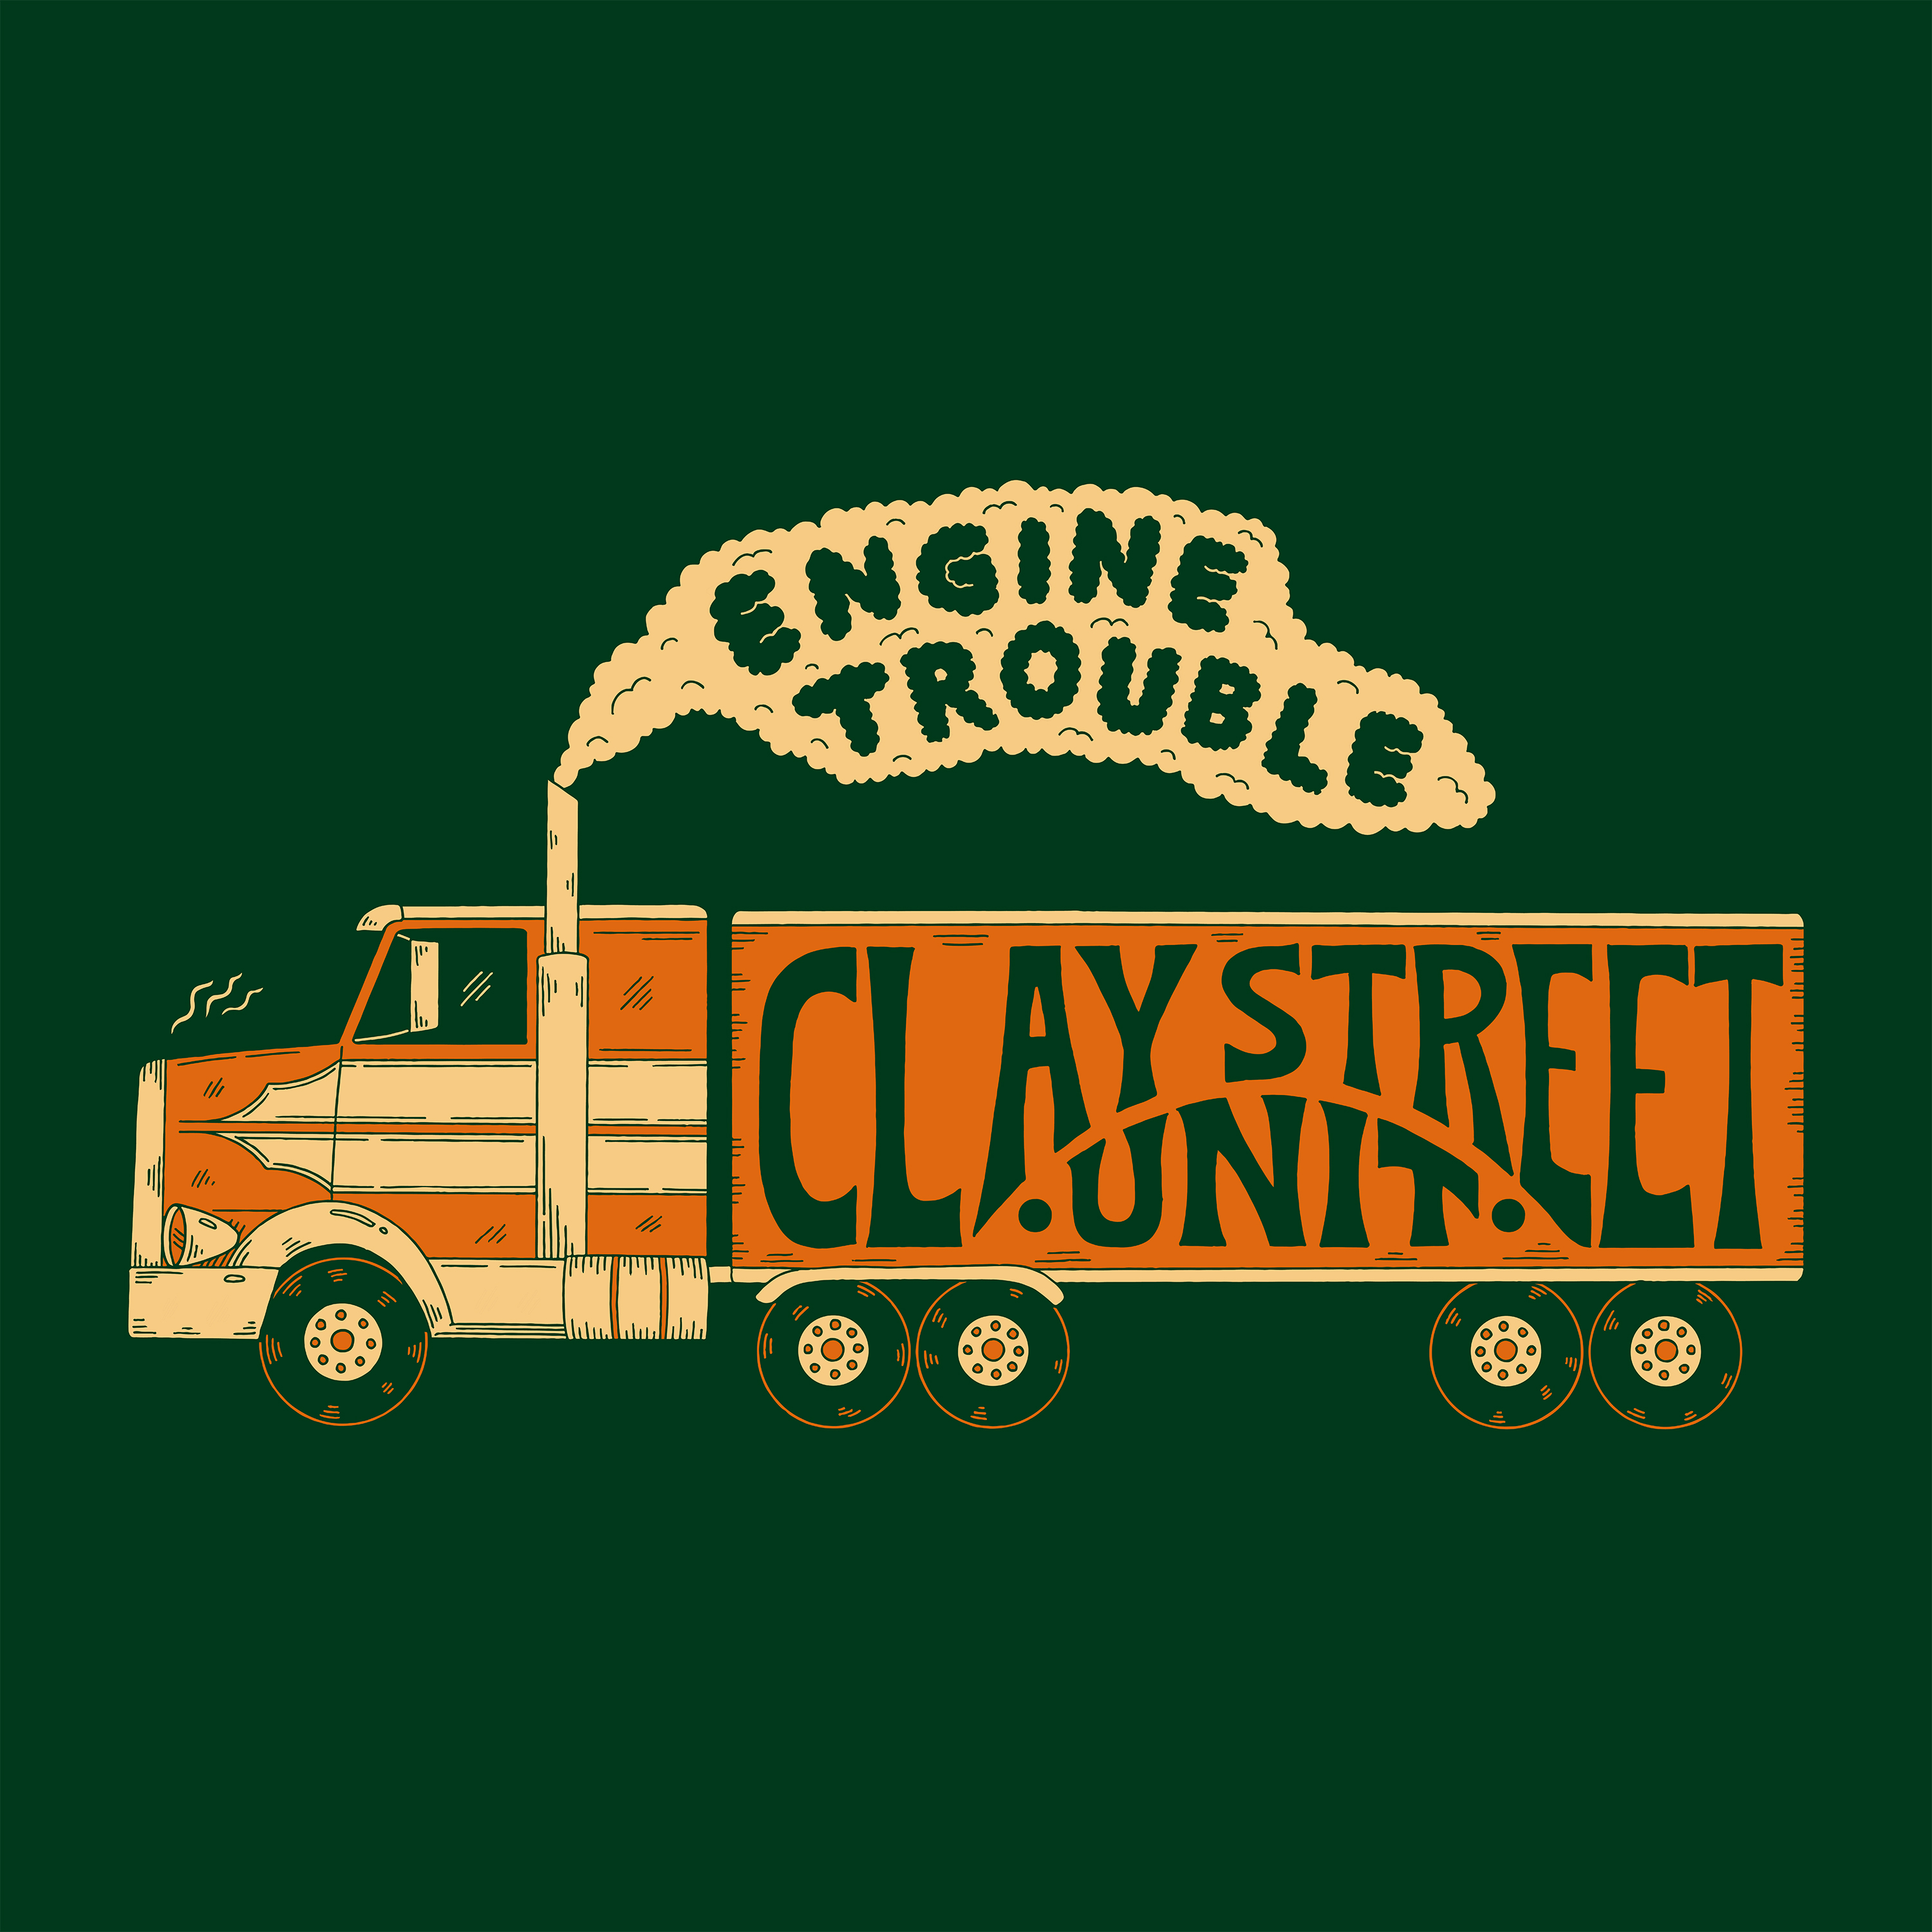 Clay Street Unit release "Engine Trouble" single